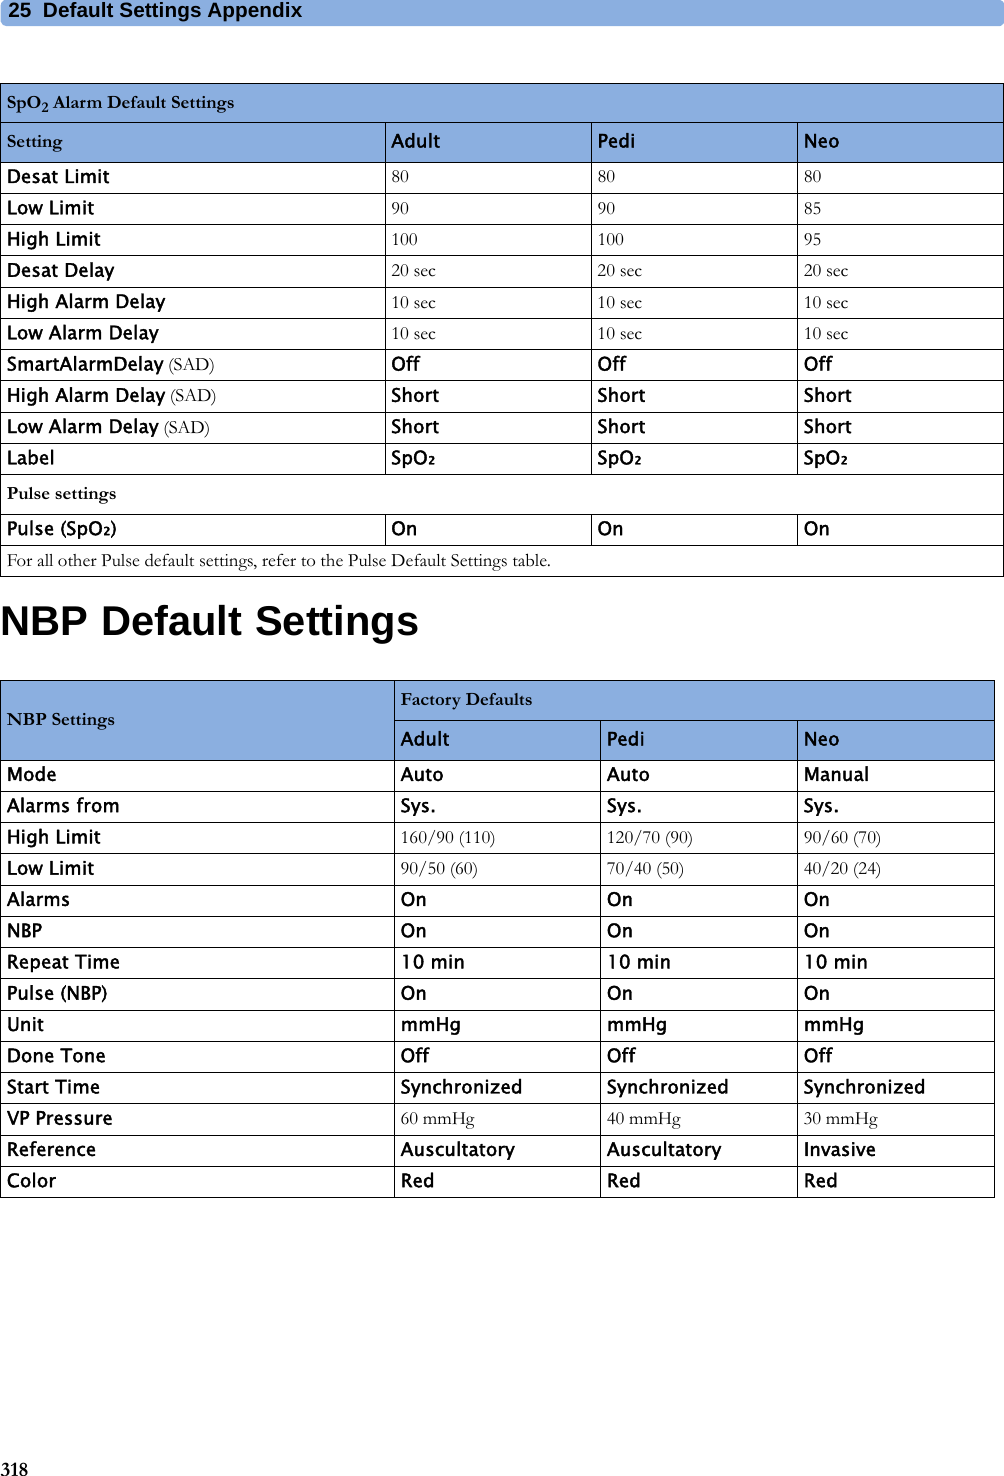 25 Default Settings Appendix318NBP Default SettingsSpO2 Alarm Default SettingsSetting Adult Pedi NeoDesat Limit 80 80 80Low Limit 90 90 85High Limit 100 100 95Desat Delay 20 sec 20 sec 20 secHigh Alarm Delay 10 sec 10 sec 10 secLow Alarm Delay 10 sec 10 sec 10 secSmartAlarmDelay (SAD) Off Off OffHigh Alarm Delay (SAD) Short Short ShortLow Alarm Delay (SAD) Short Short ShortLabel SpO₂SpO₂SpO₂Pulse settingsPulse (SpO₂) OnOnOnFor all other Pulse default settings, refer to the Pulse Default Settings table.NBP SettingsFactory Defaults Adult Pedi NeoMode Auto Auto ManualAlarms from Sys. Sys. Sys.High Limit 160/90 (110) 120/70 (90) 90/60 (70)Low Limit 90/50 (60) 70/40 (50) 40/20 (24)Alarms On On OnNBP On On OnRepeat Time 10 min 10 min 10 minPulse (NBP) On On OnUnit mmHg mmHg mmHgDone Tone Off Off OffStart Time Synchronized Synchronized SynchronizedVP Pressure 60 mmHg 40 mmHg 30 mmHgReference Auscultatory Auscultatory InvasiveColor Red Red Red